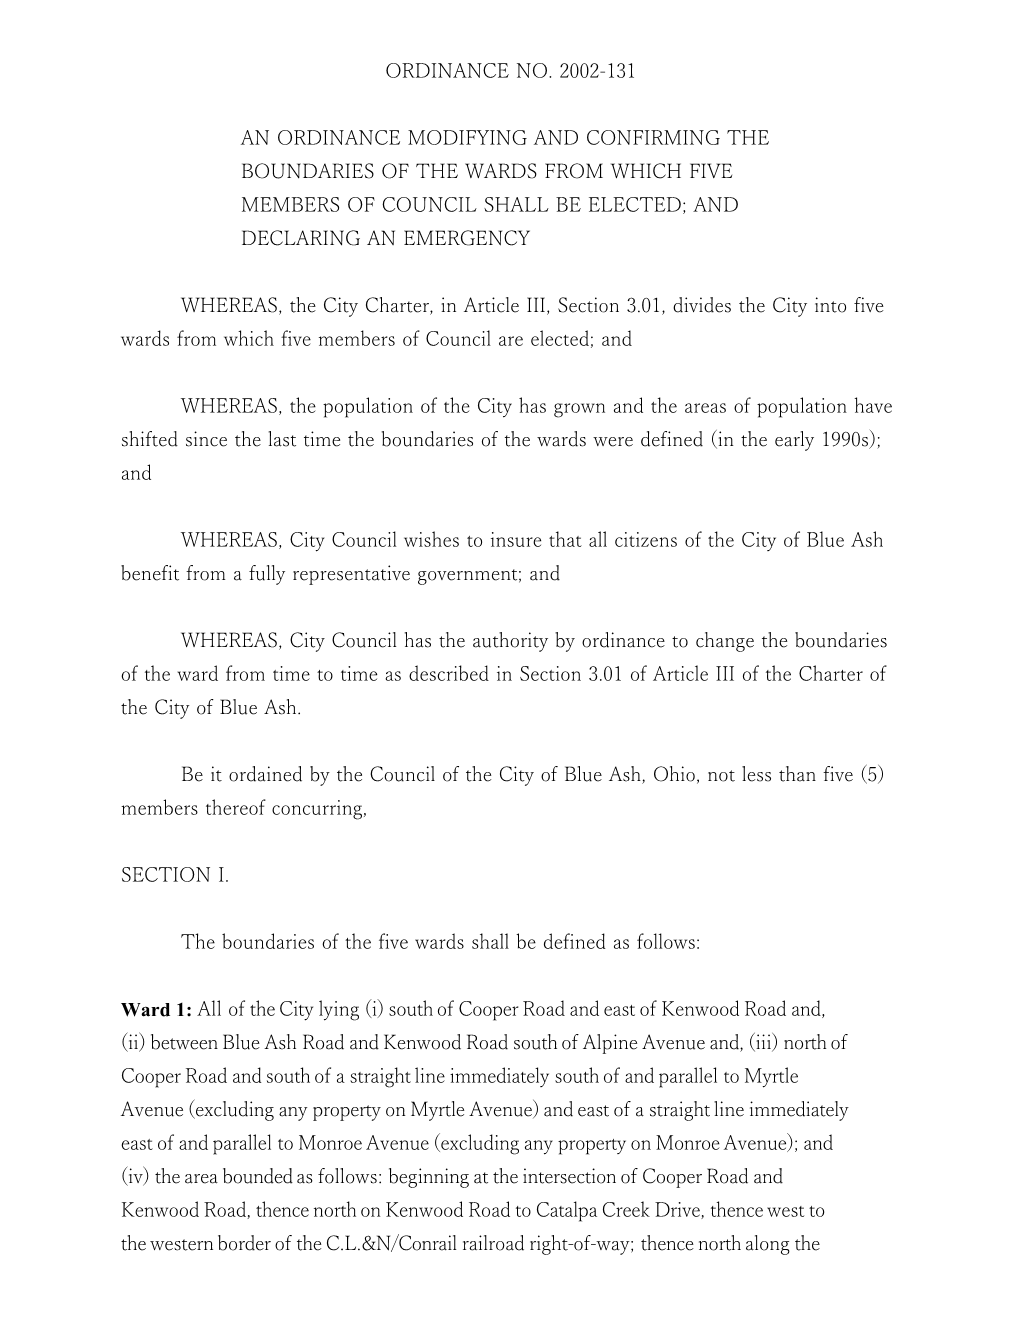 WHEREAS, the City Charter, in Article III, Section 3.01, Divides the City Into Five Wards